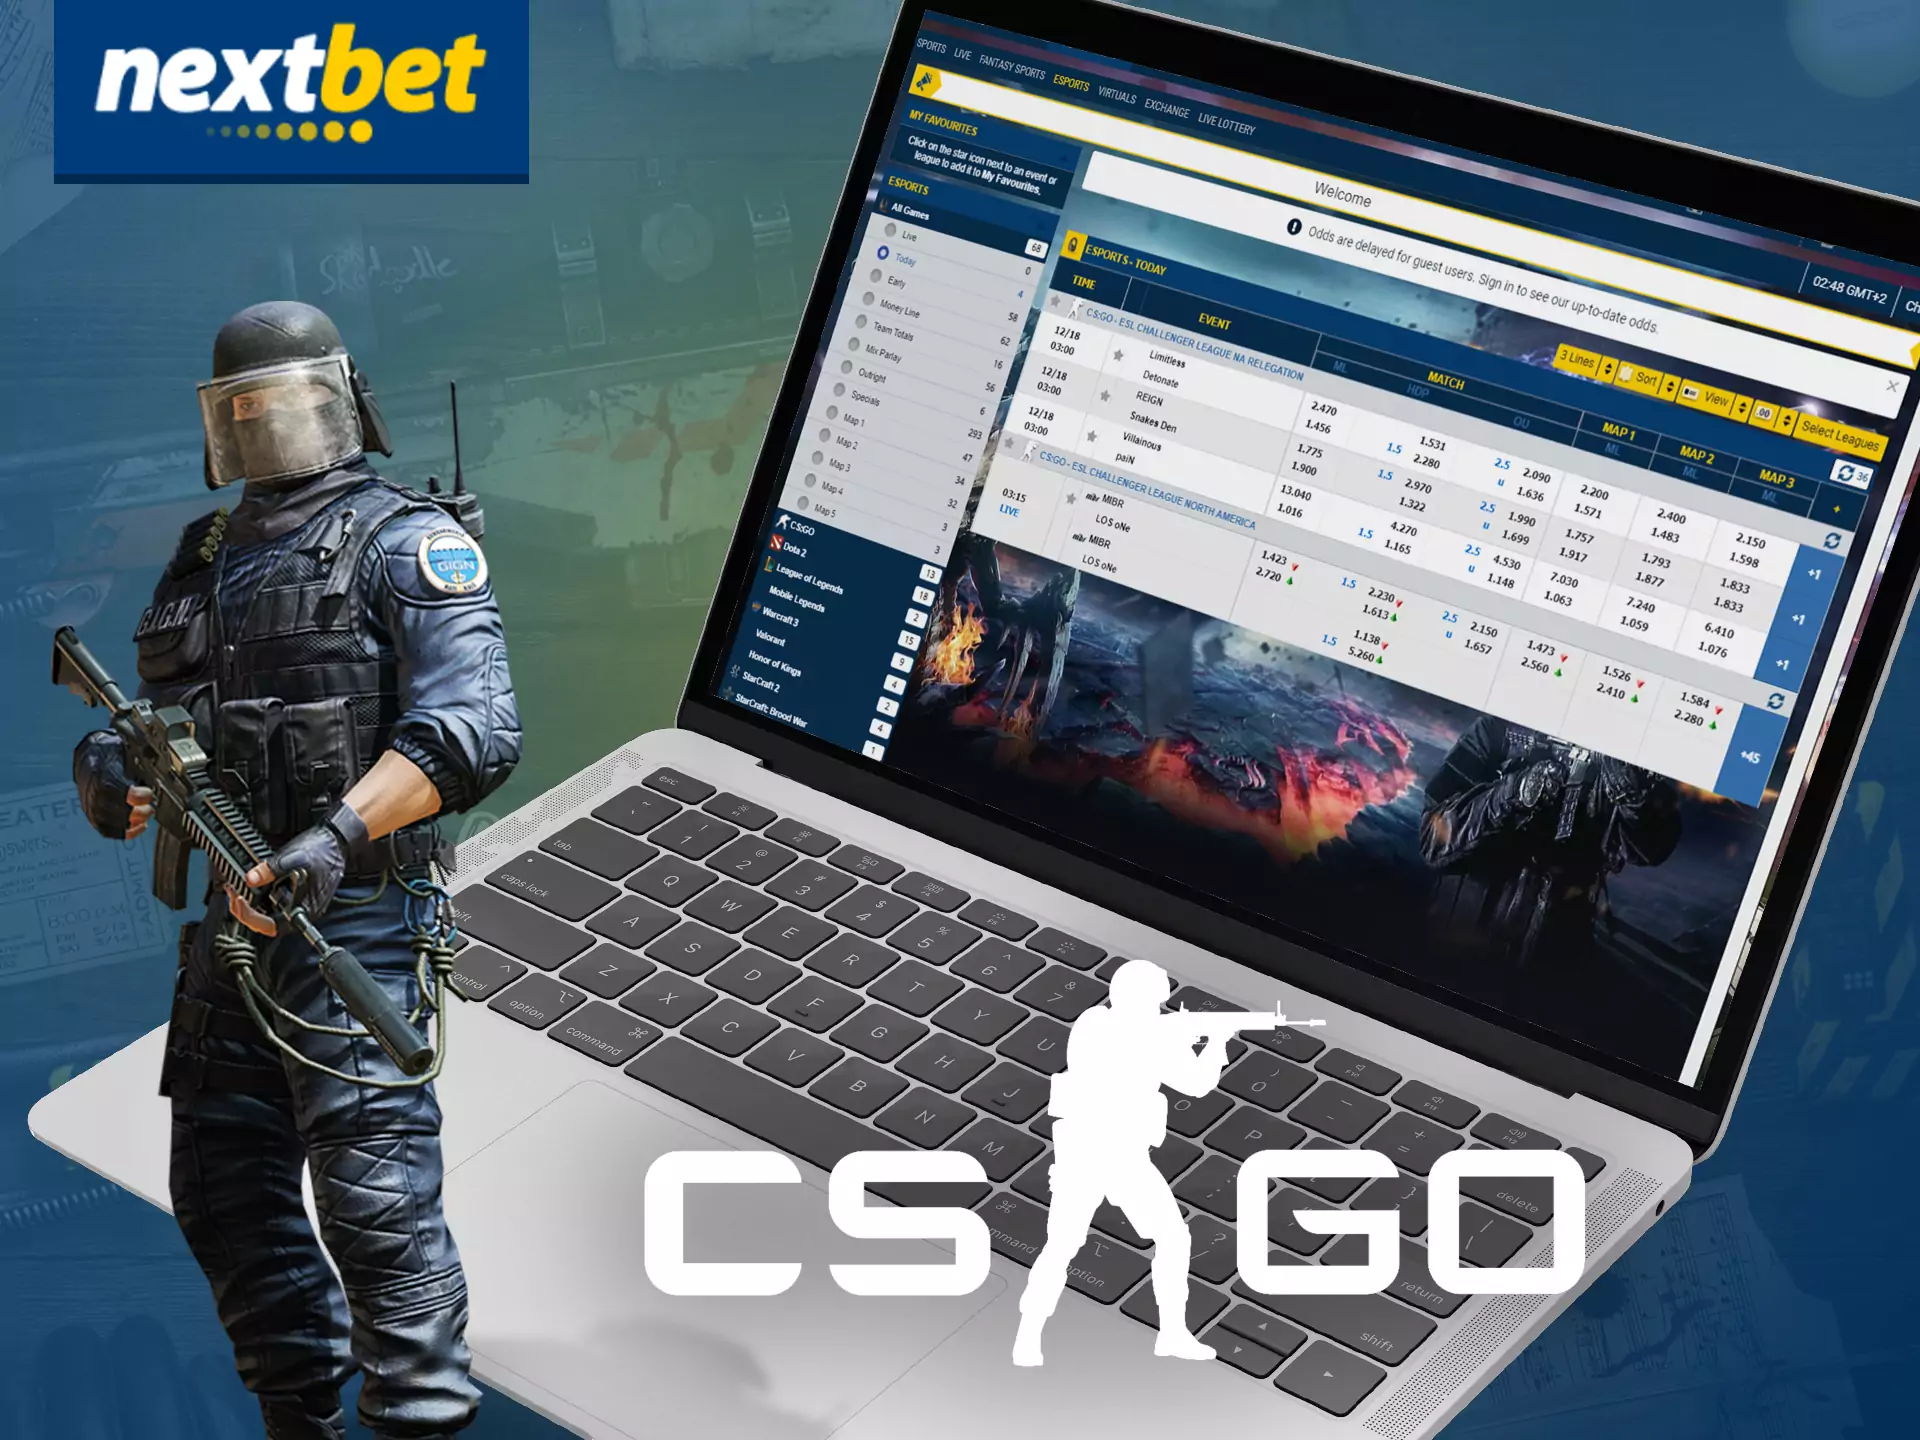 In Nextbet, place bets on games in CS:GO.